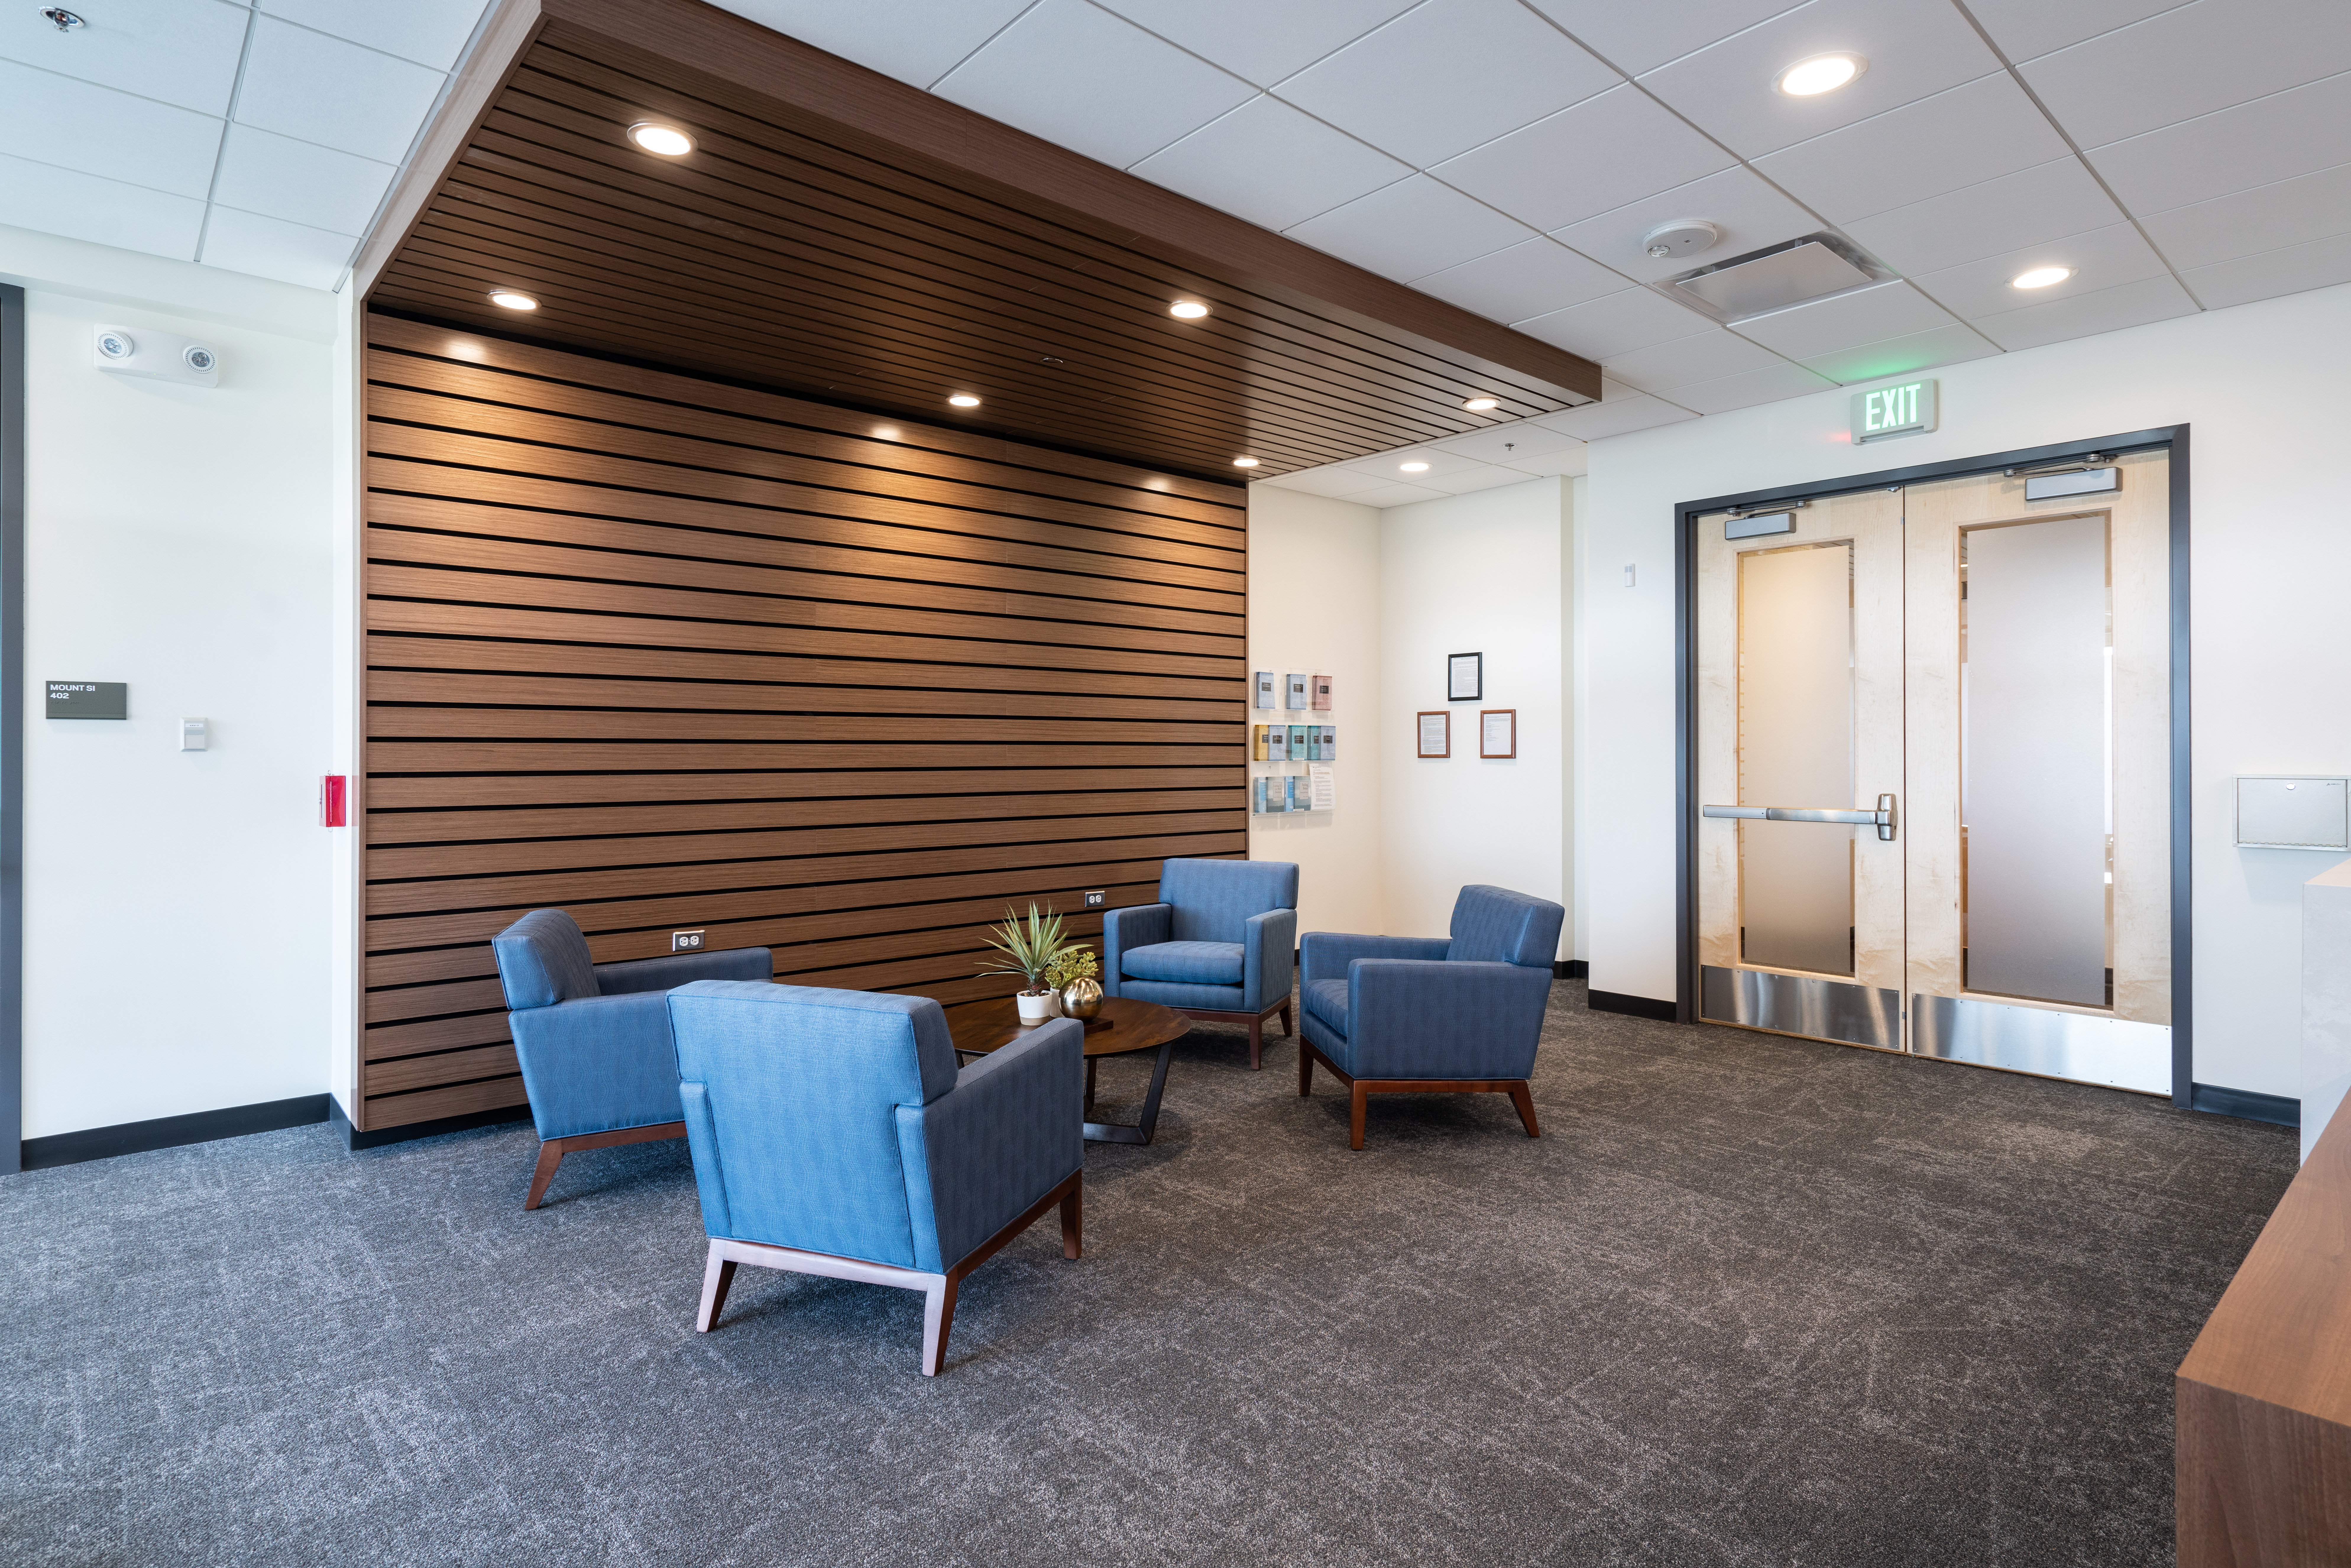 The Hazelden Betty Ford lobby in Bellevue Washington furnished with comfortable blue chairs